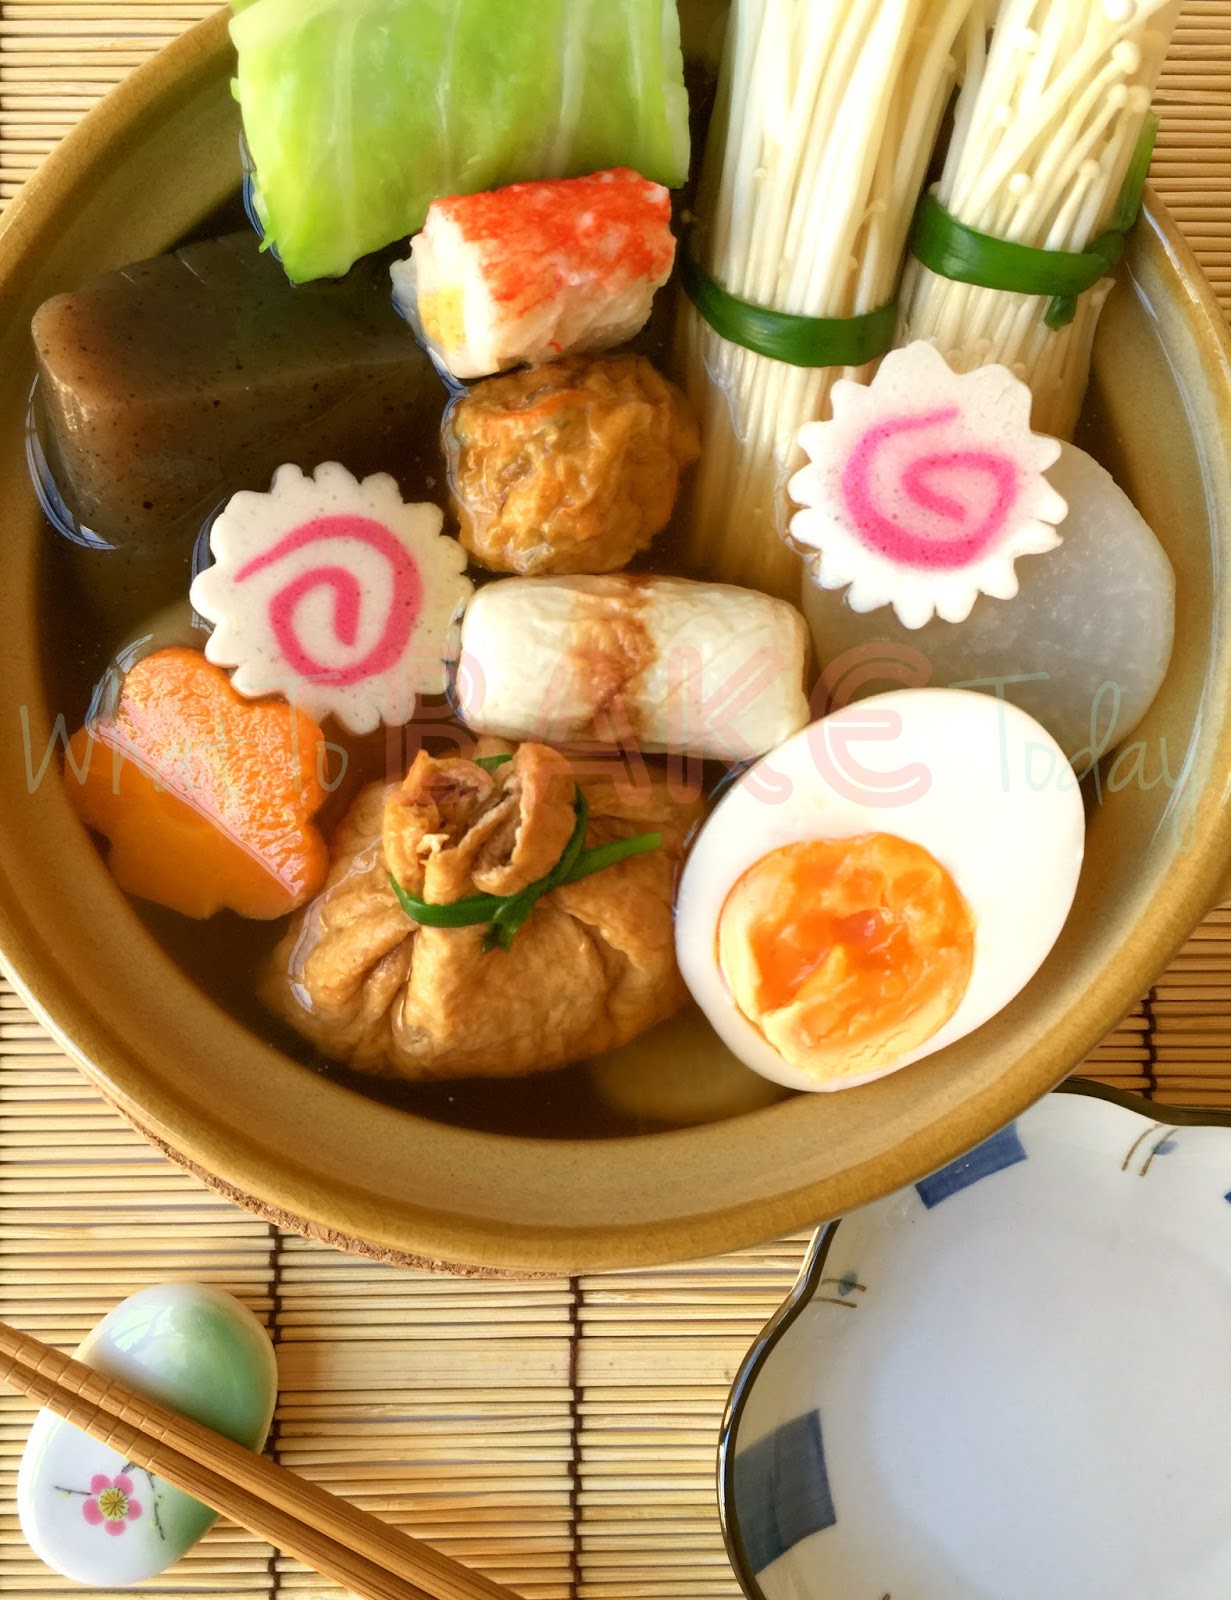 Oden 🍢 season. It's suddenly cold 🥶 in Tokyo. The oden hot pot